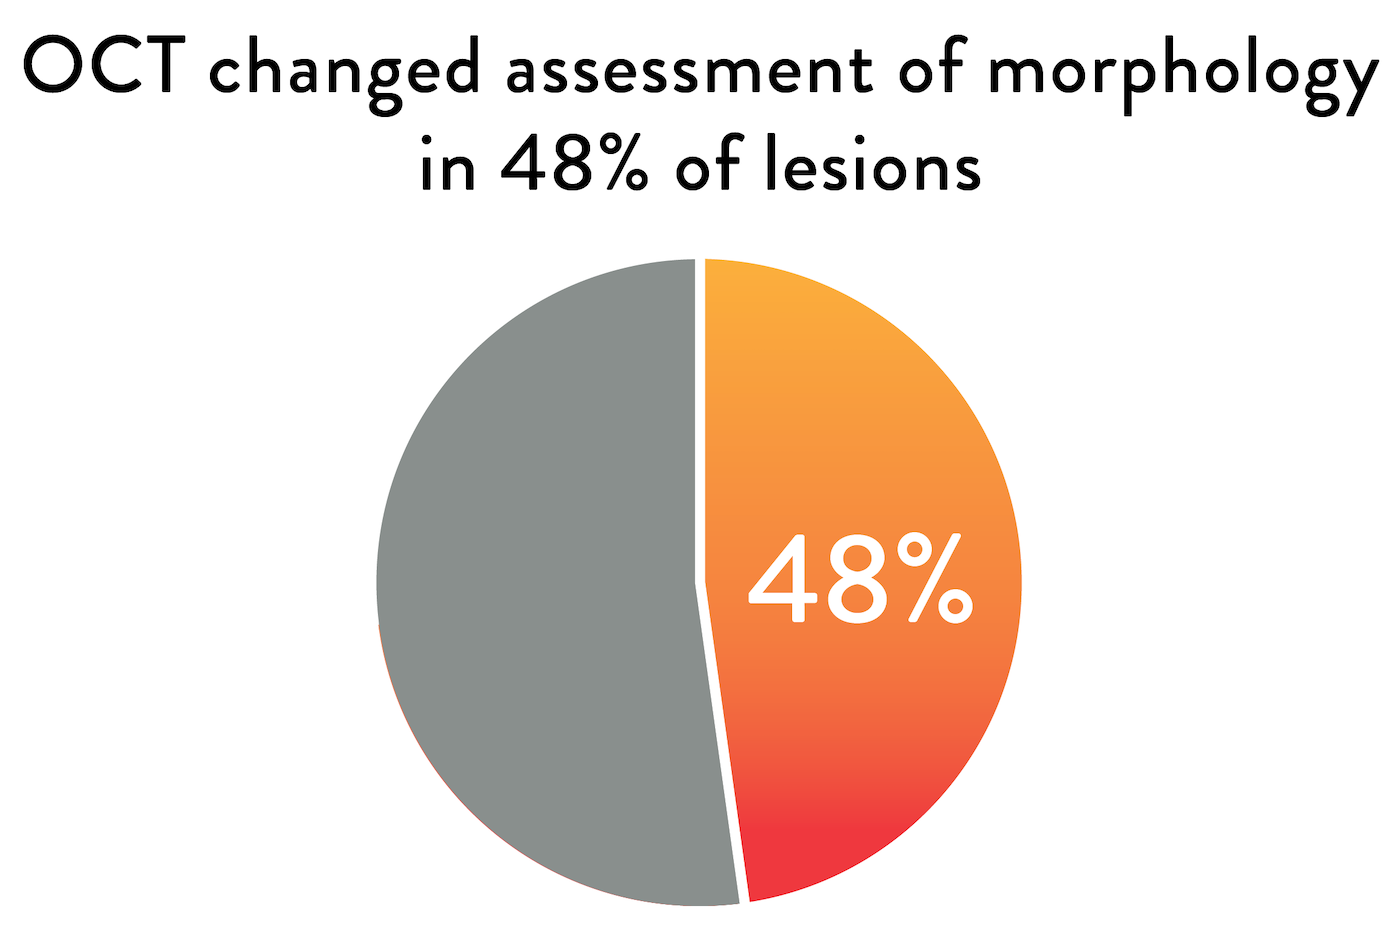  OCT changed assessment of morphology in 48% of lesions